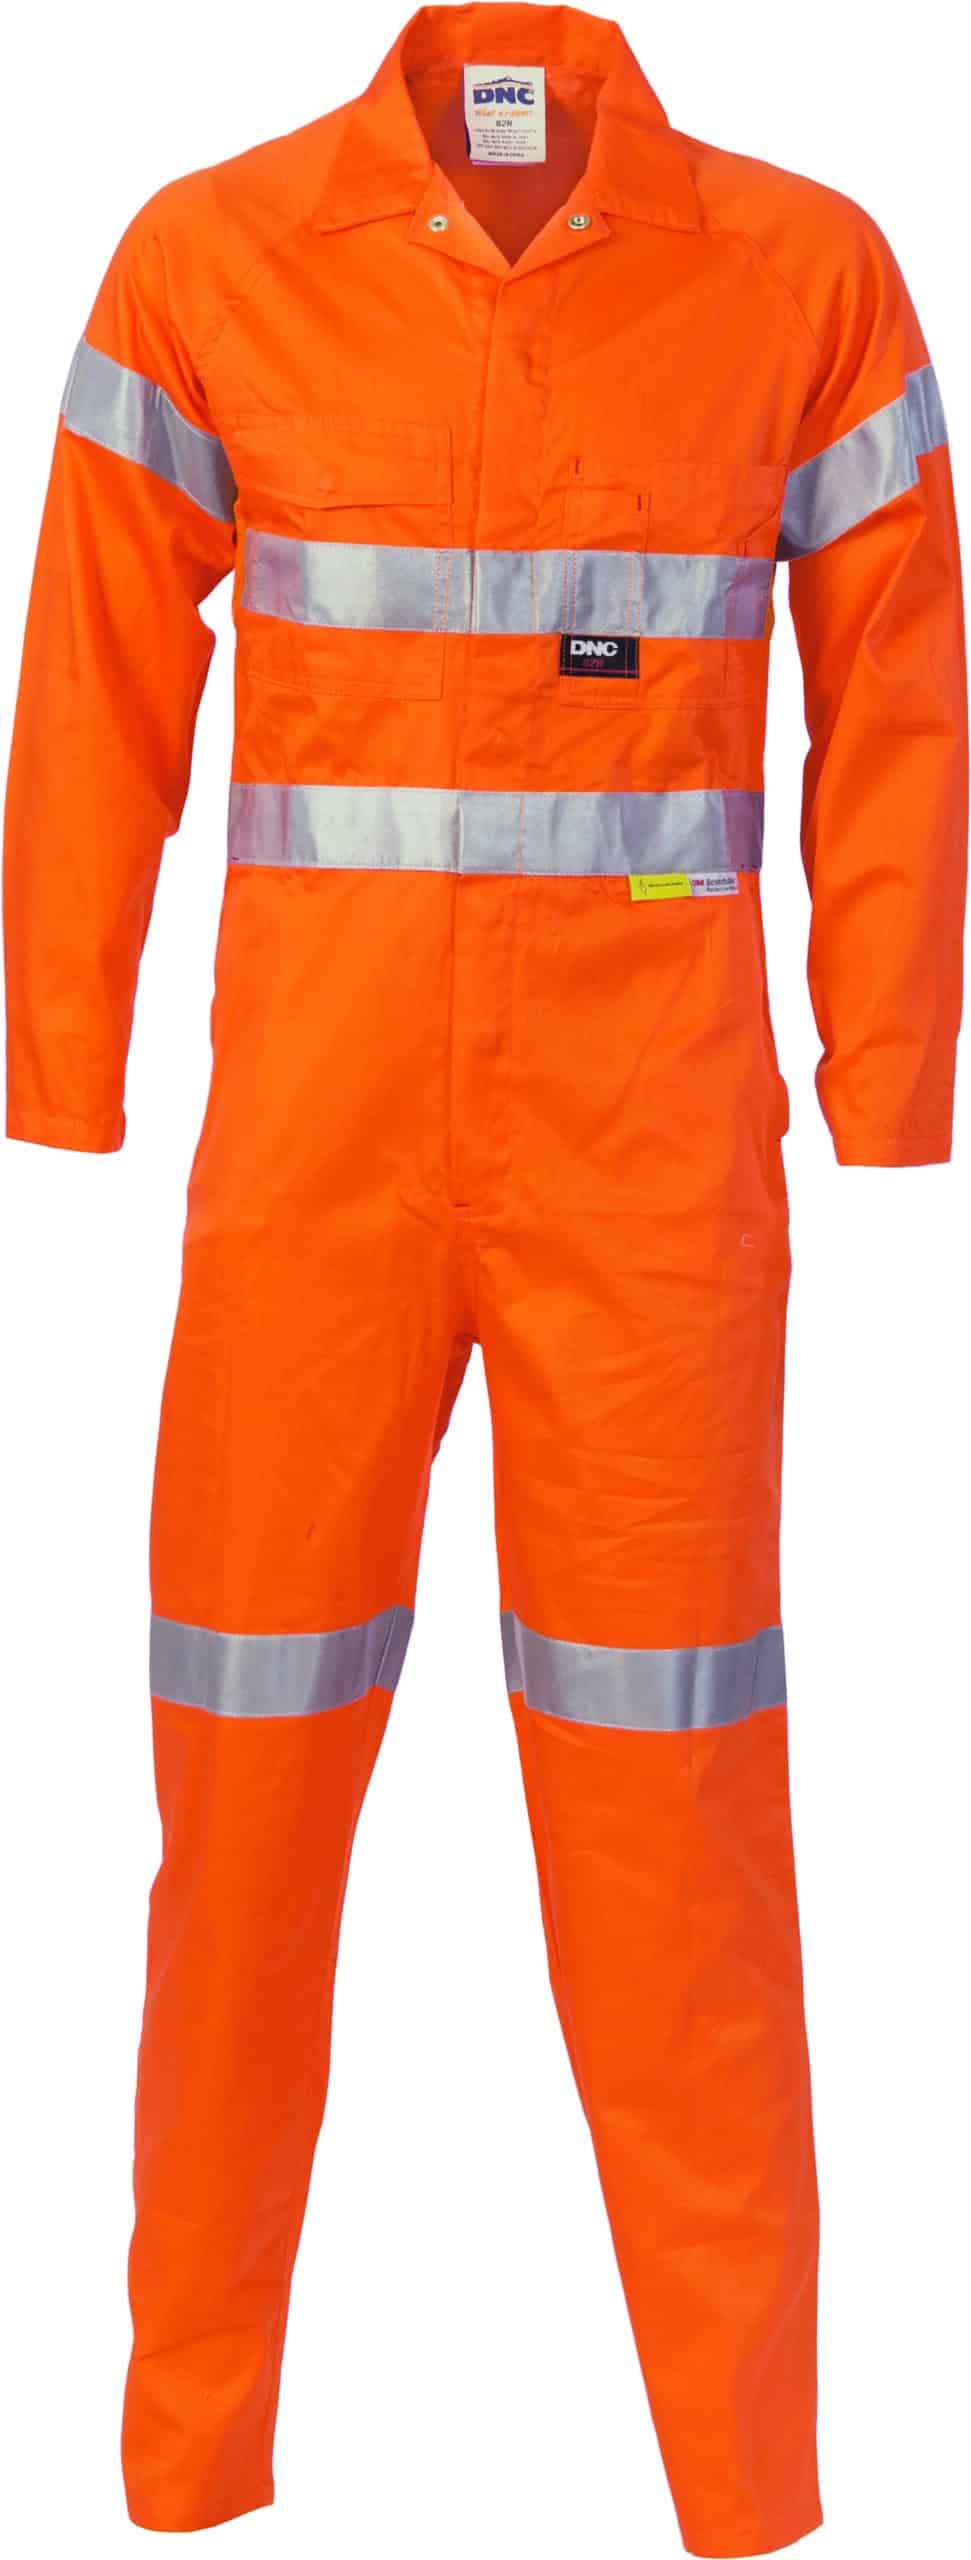 DNC Workwear Hi Vis Cotton Coverall with 3M Reflective Tape